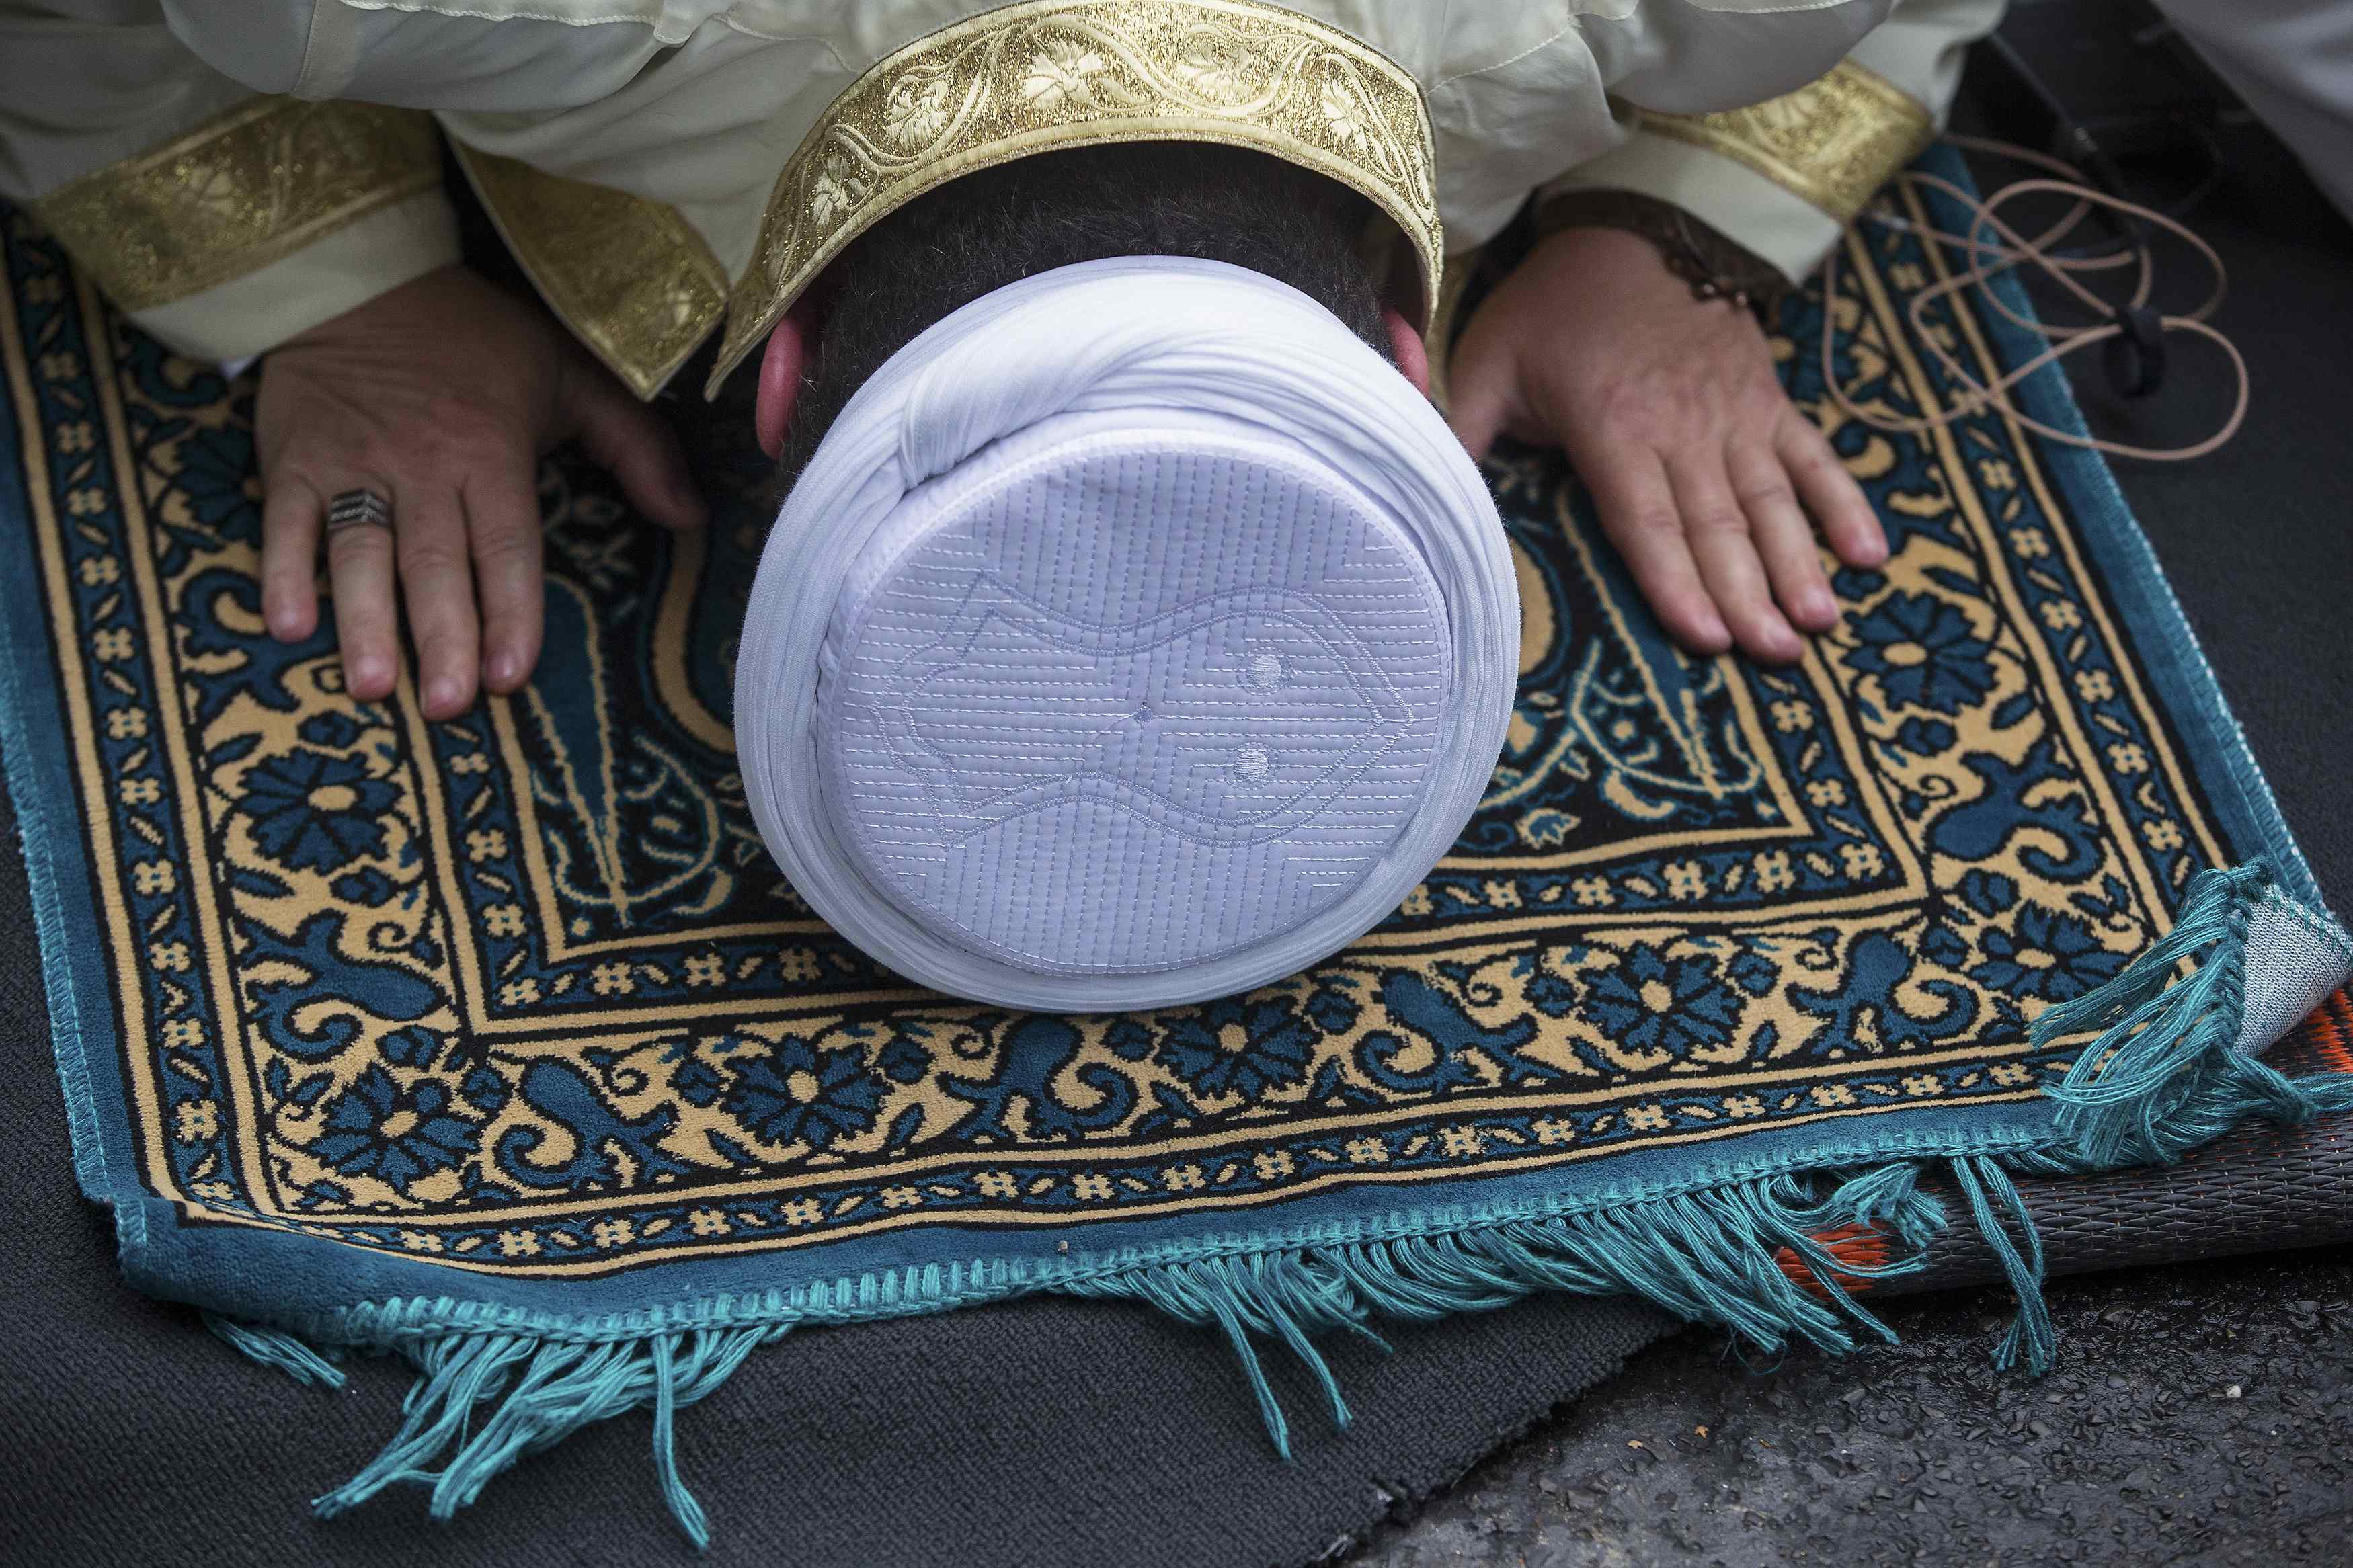 Over 2.6 million Muslims live in the United States. (Photo: Reuters)